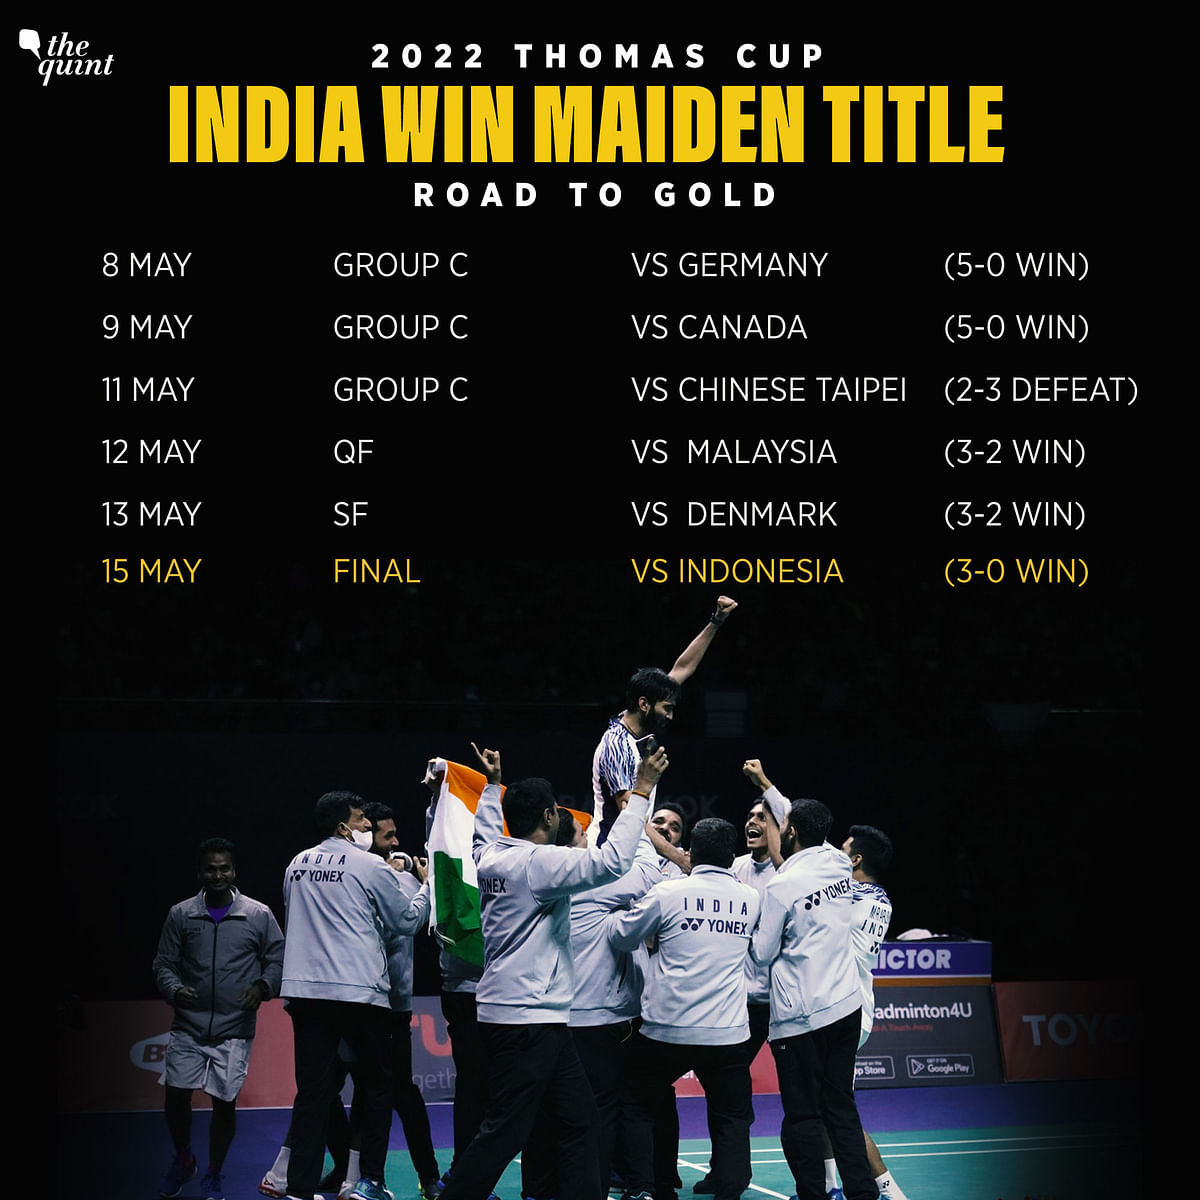 India faced defending champions Indonesia in the final and have become only the 6th country to win Thomas Cup.